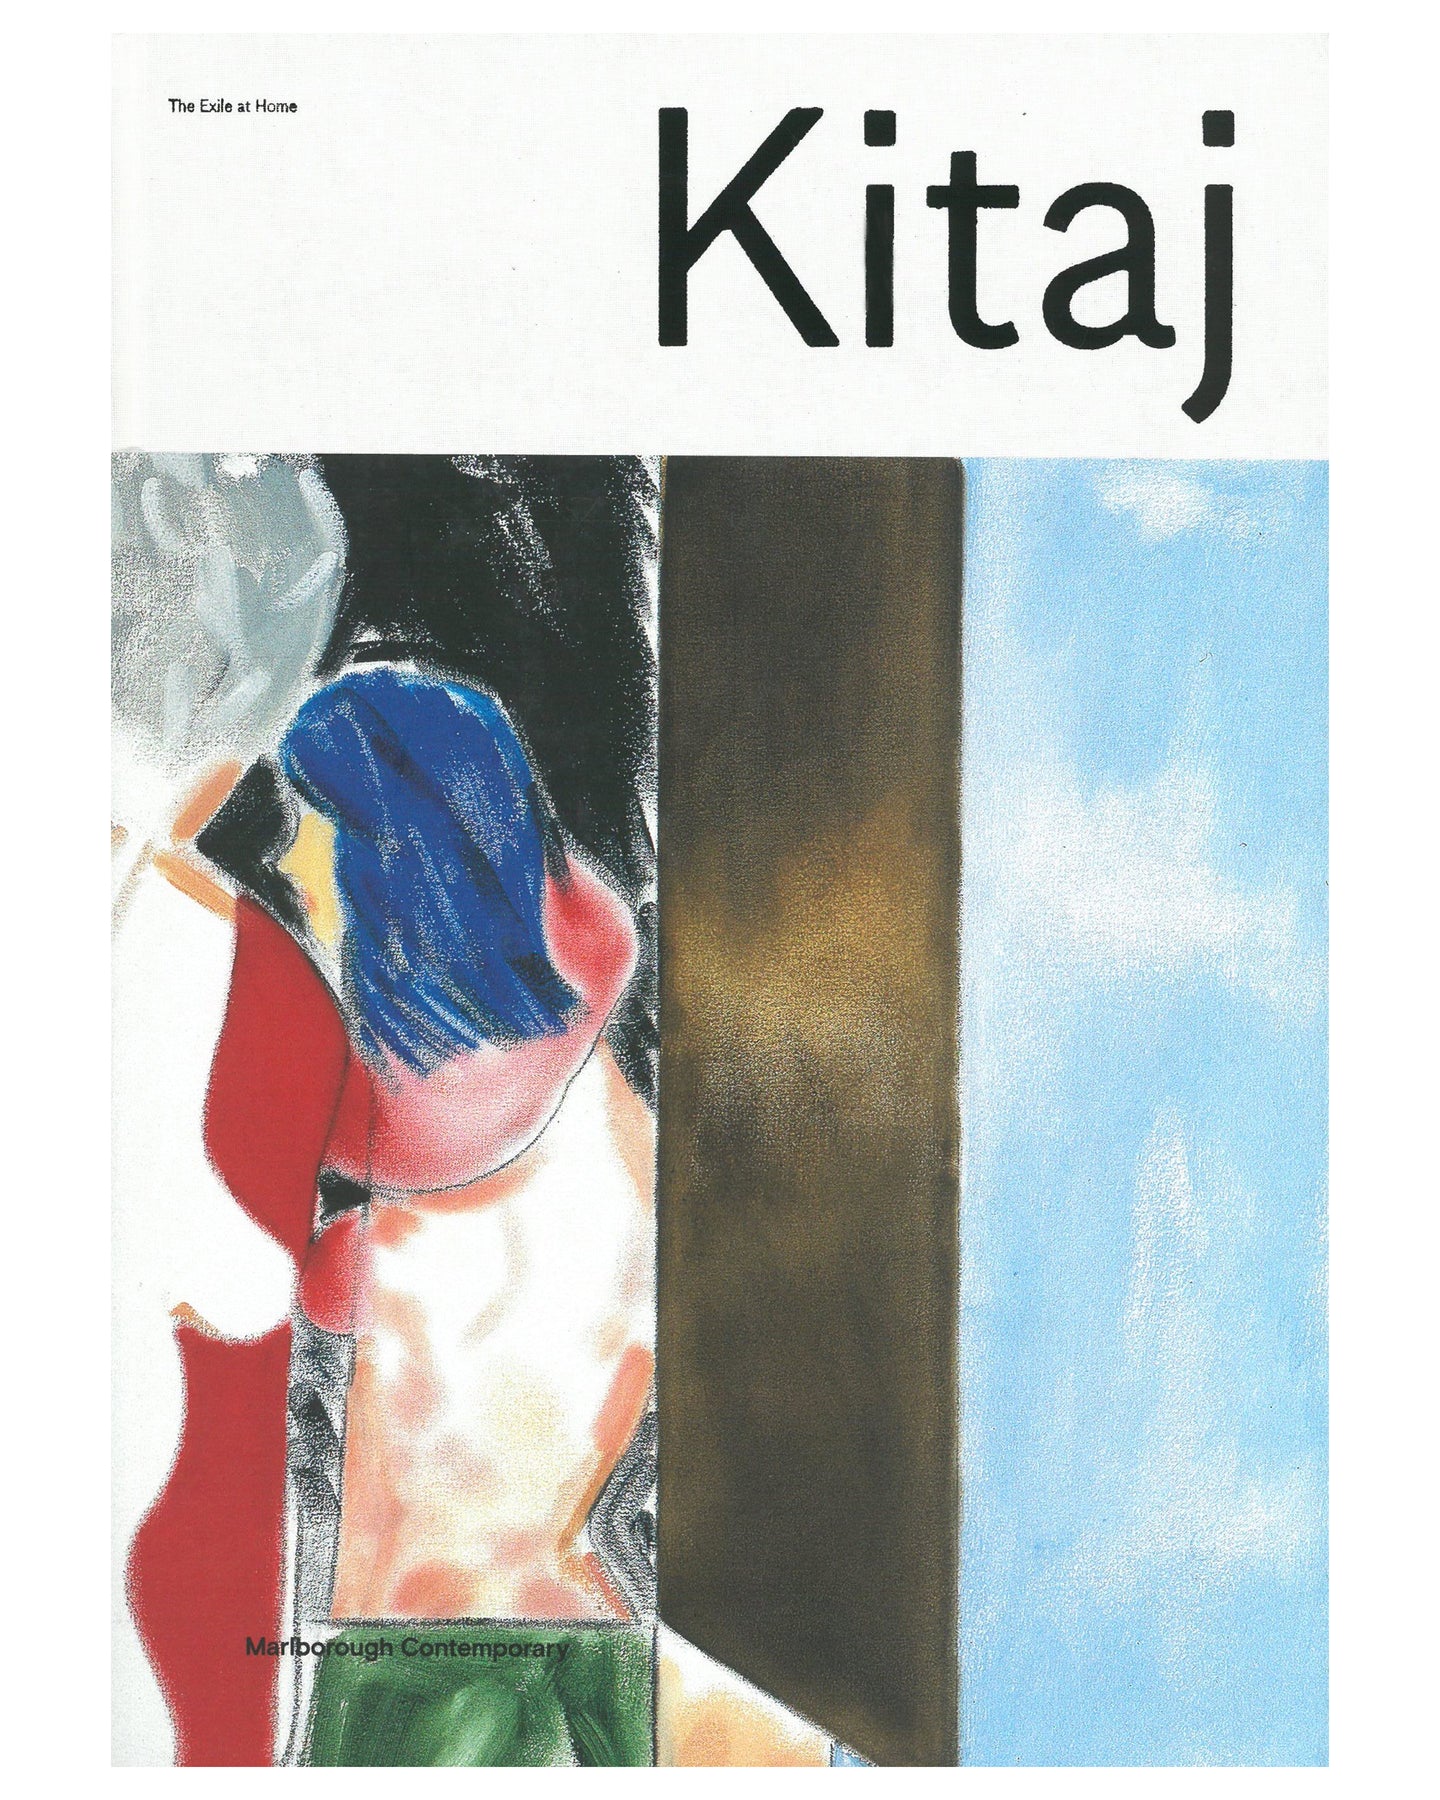 Kitaj catalogue featuring an abstract painting with blue, brown, and red colors